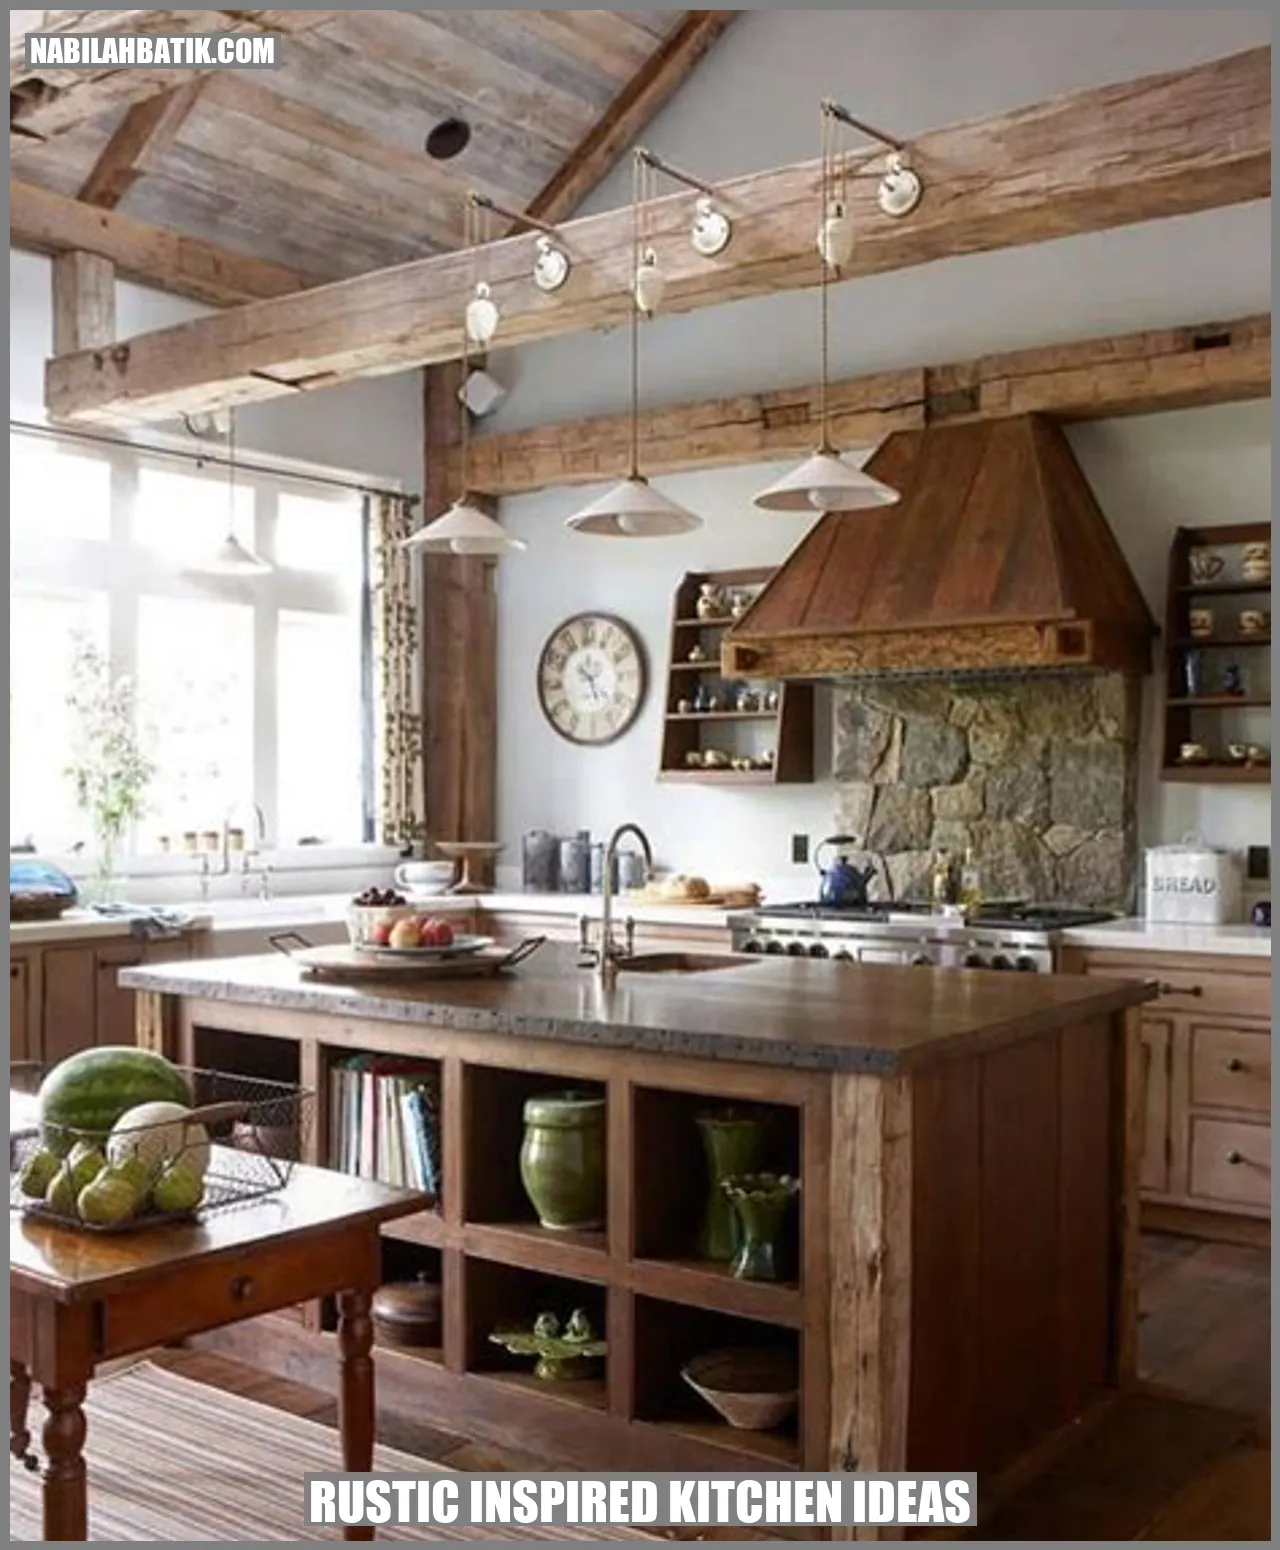 Rustic Inspired Kitchen Ideas